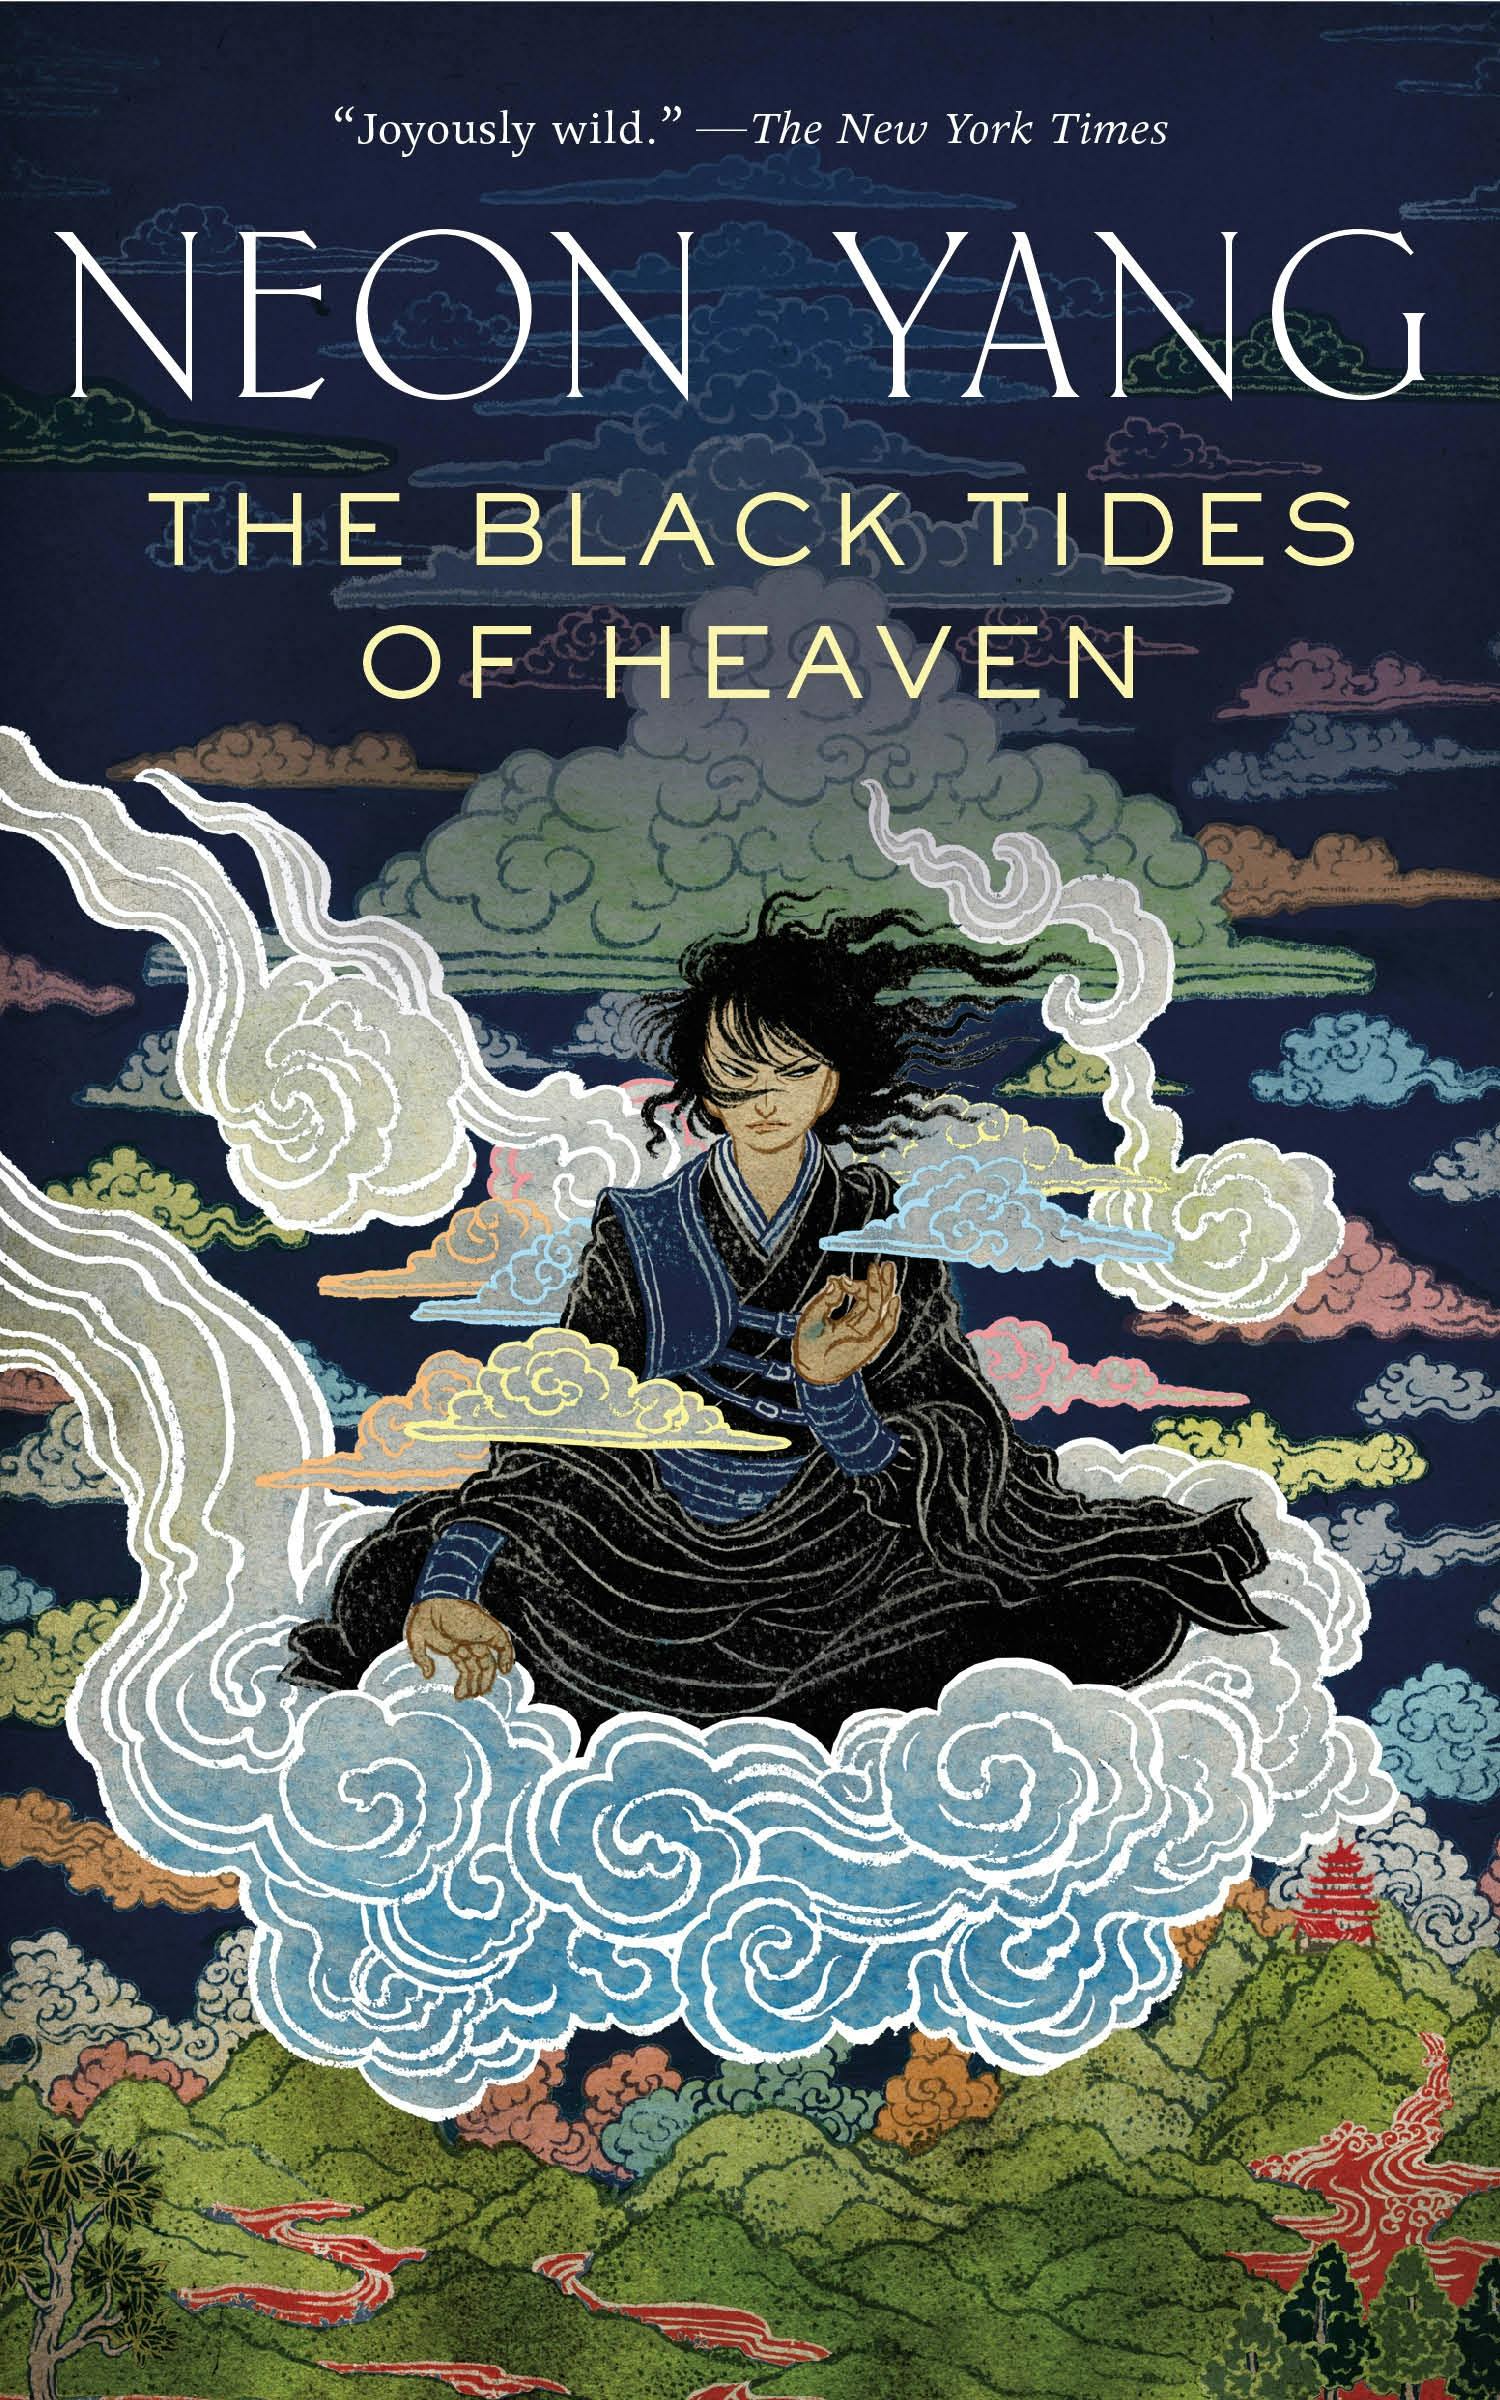 Cover for the book titled as: The Black Tides of Heaven